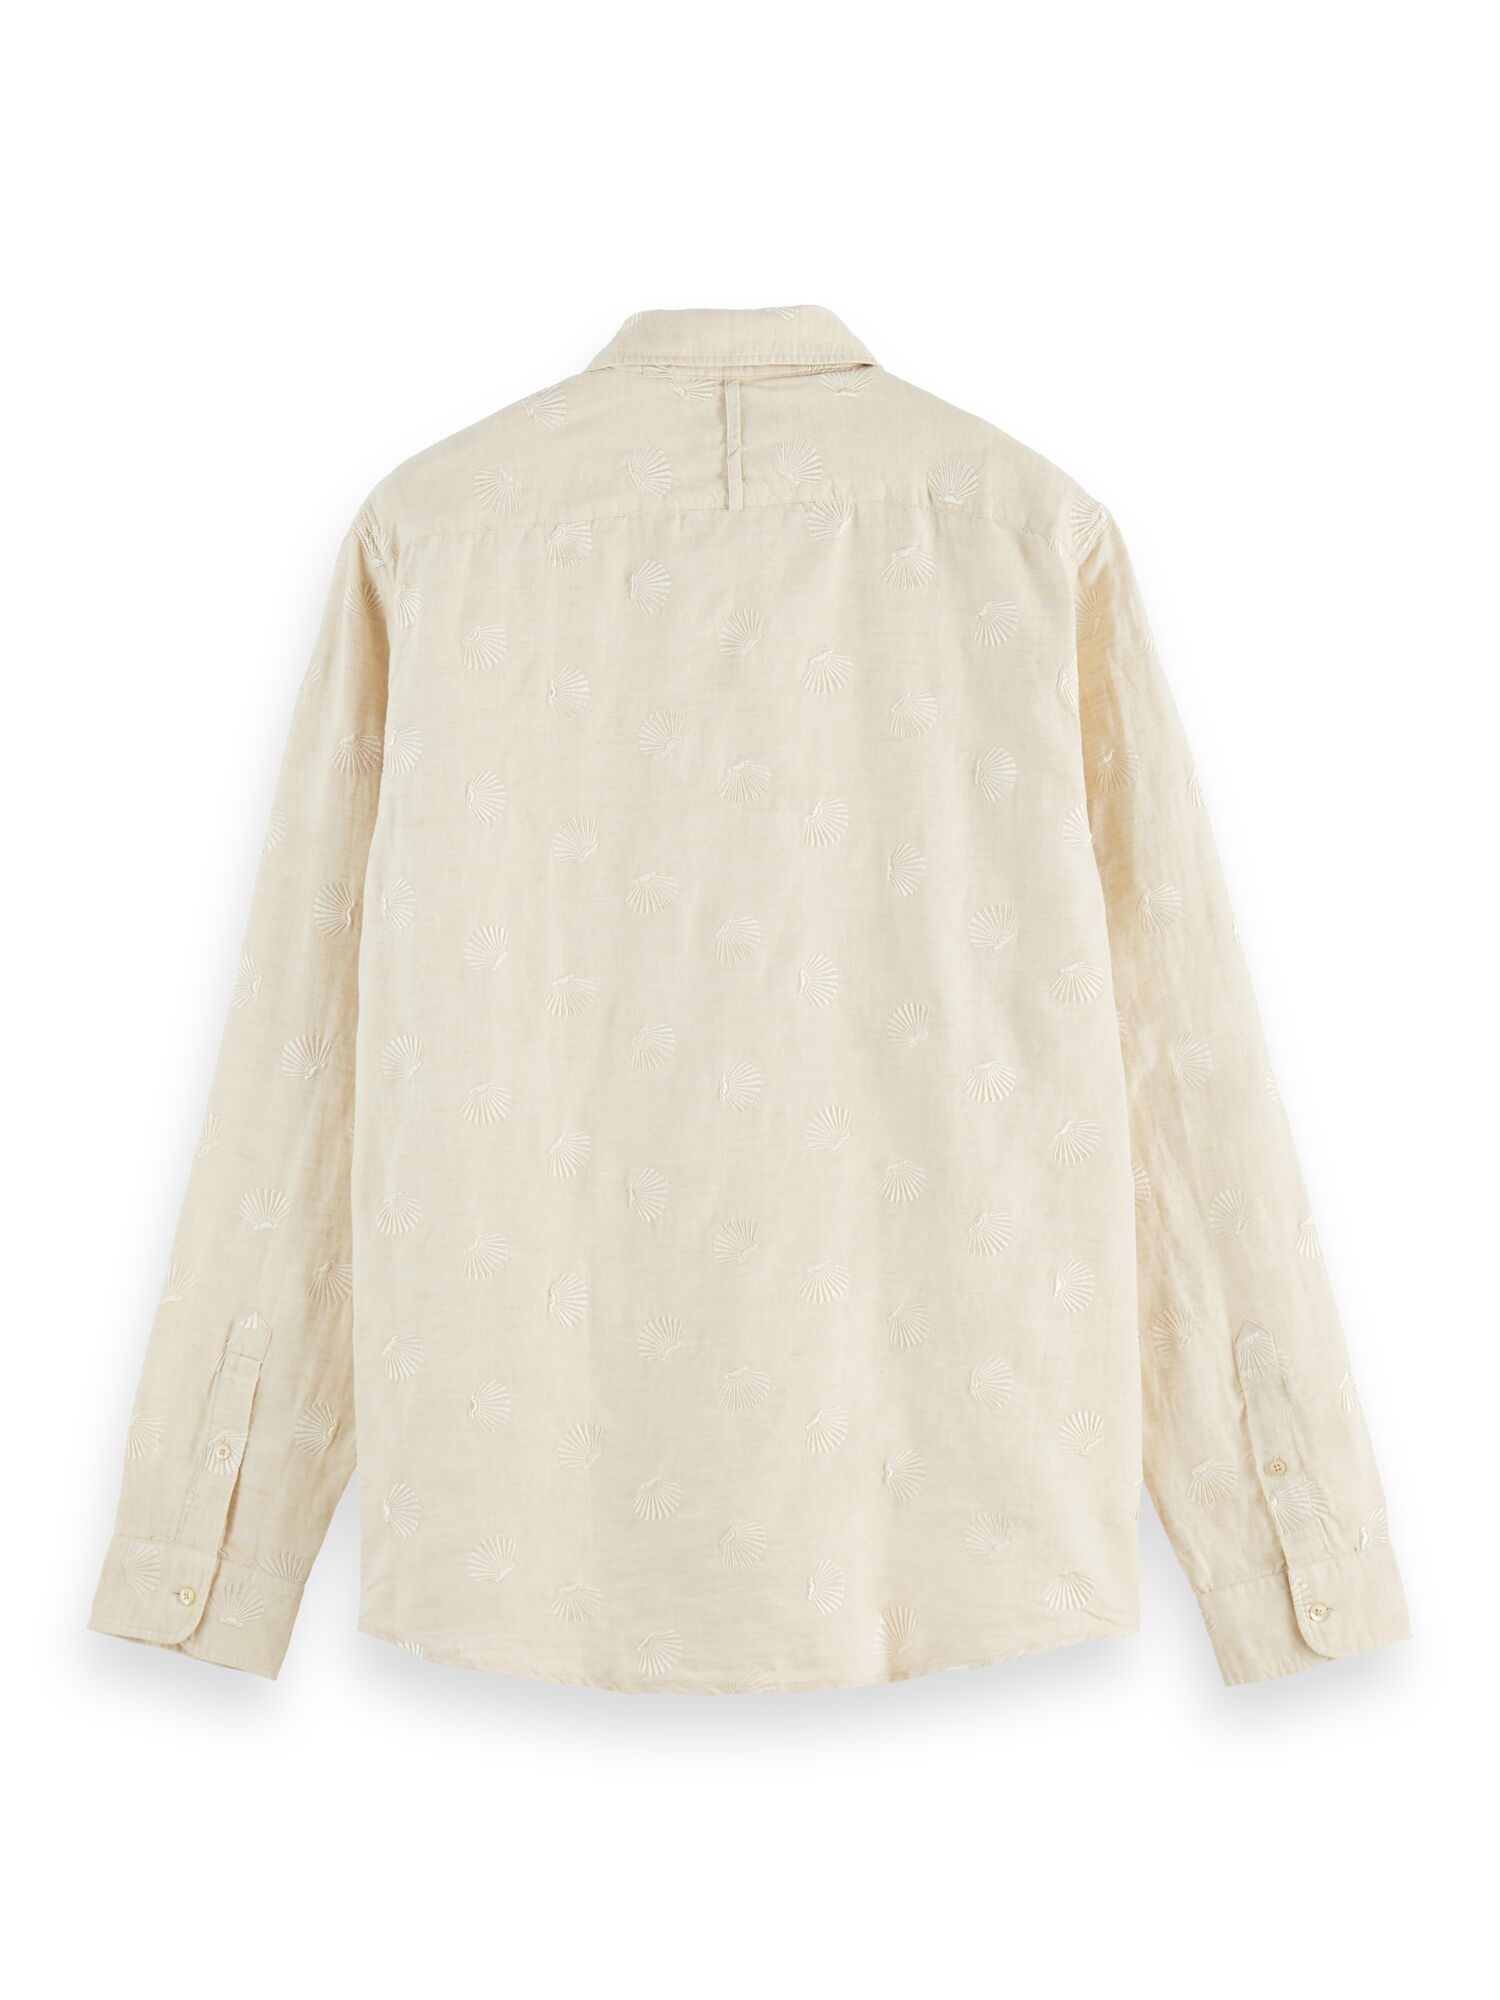 Scotch & Soda | RELAXED FIT- Embroidered organic cotton blend shirt 0